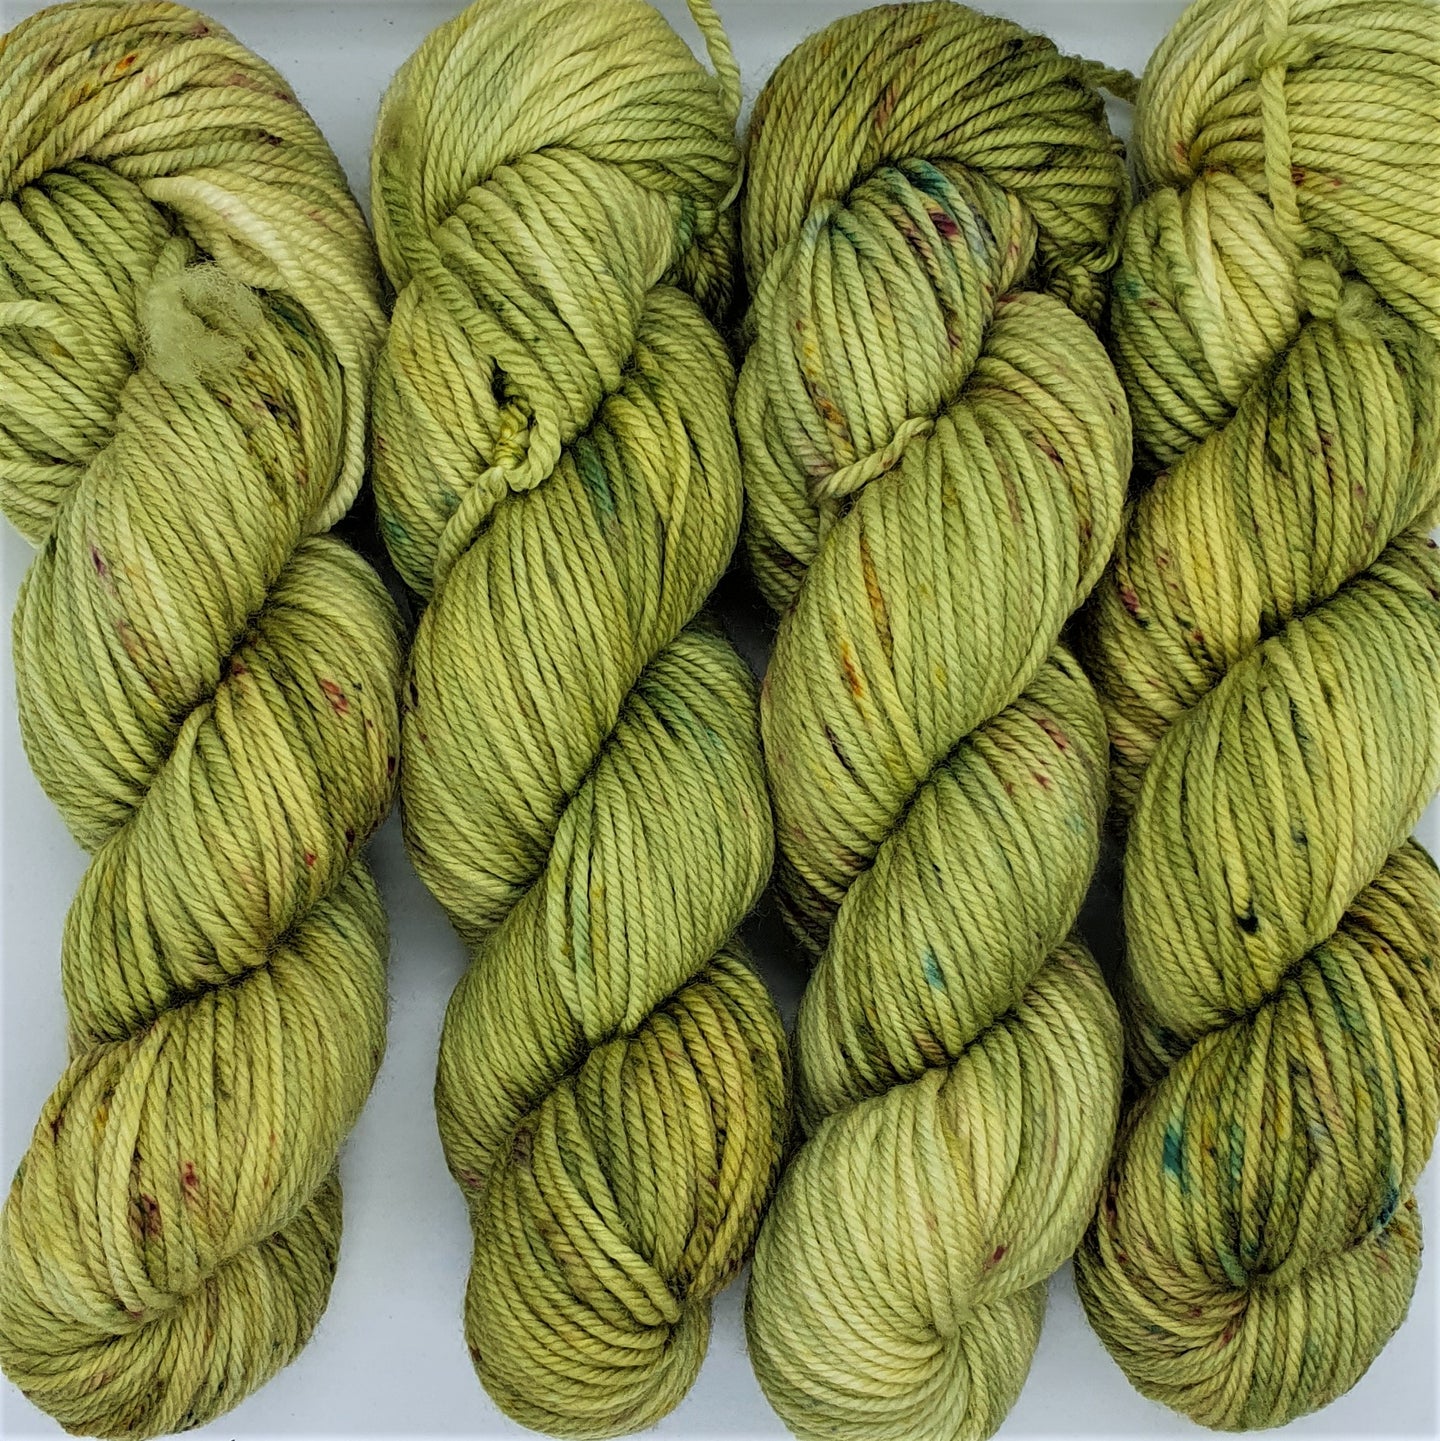 Sprout (Wyvern Worsted 12ply)